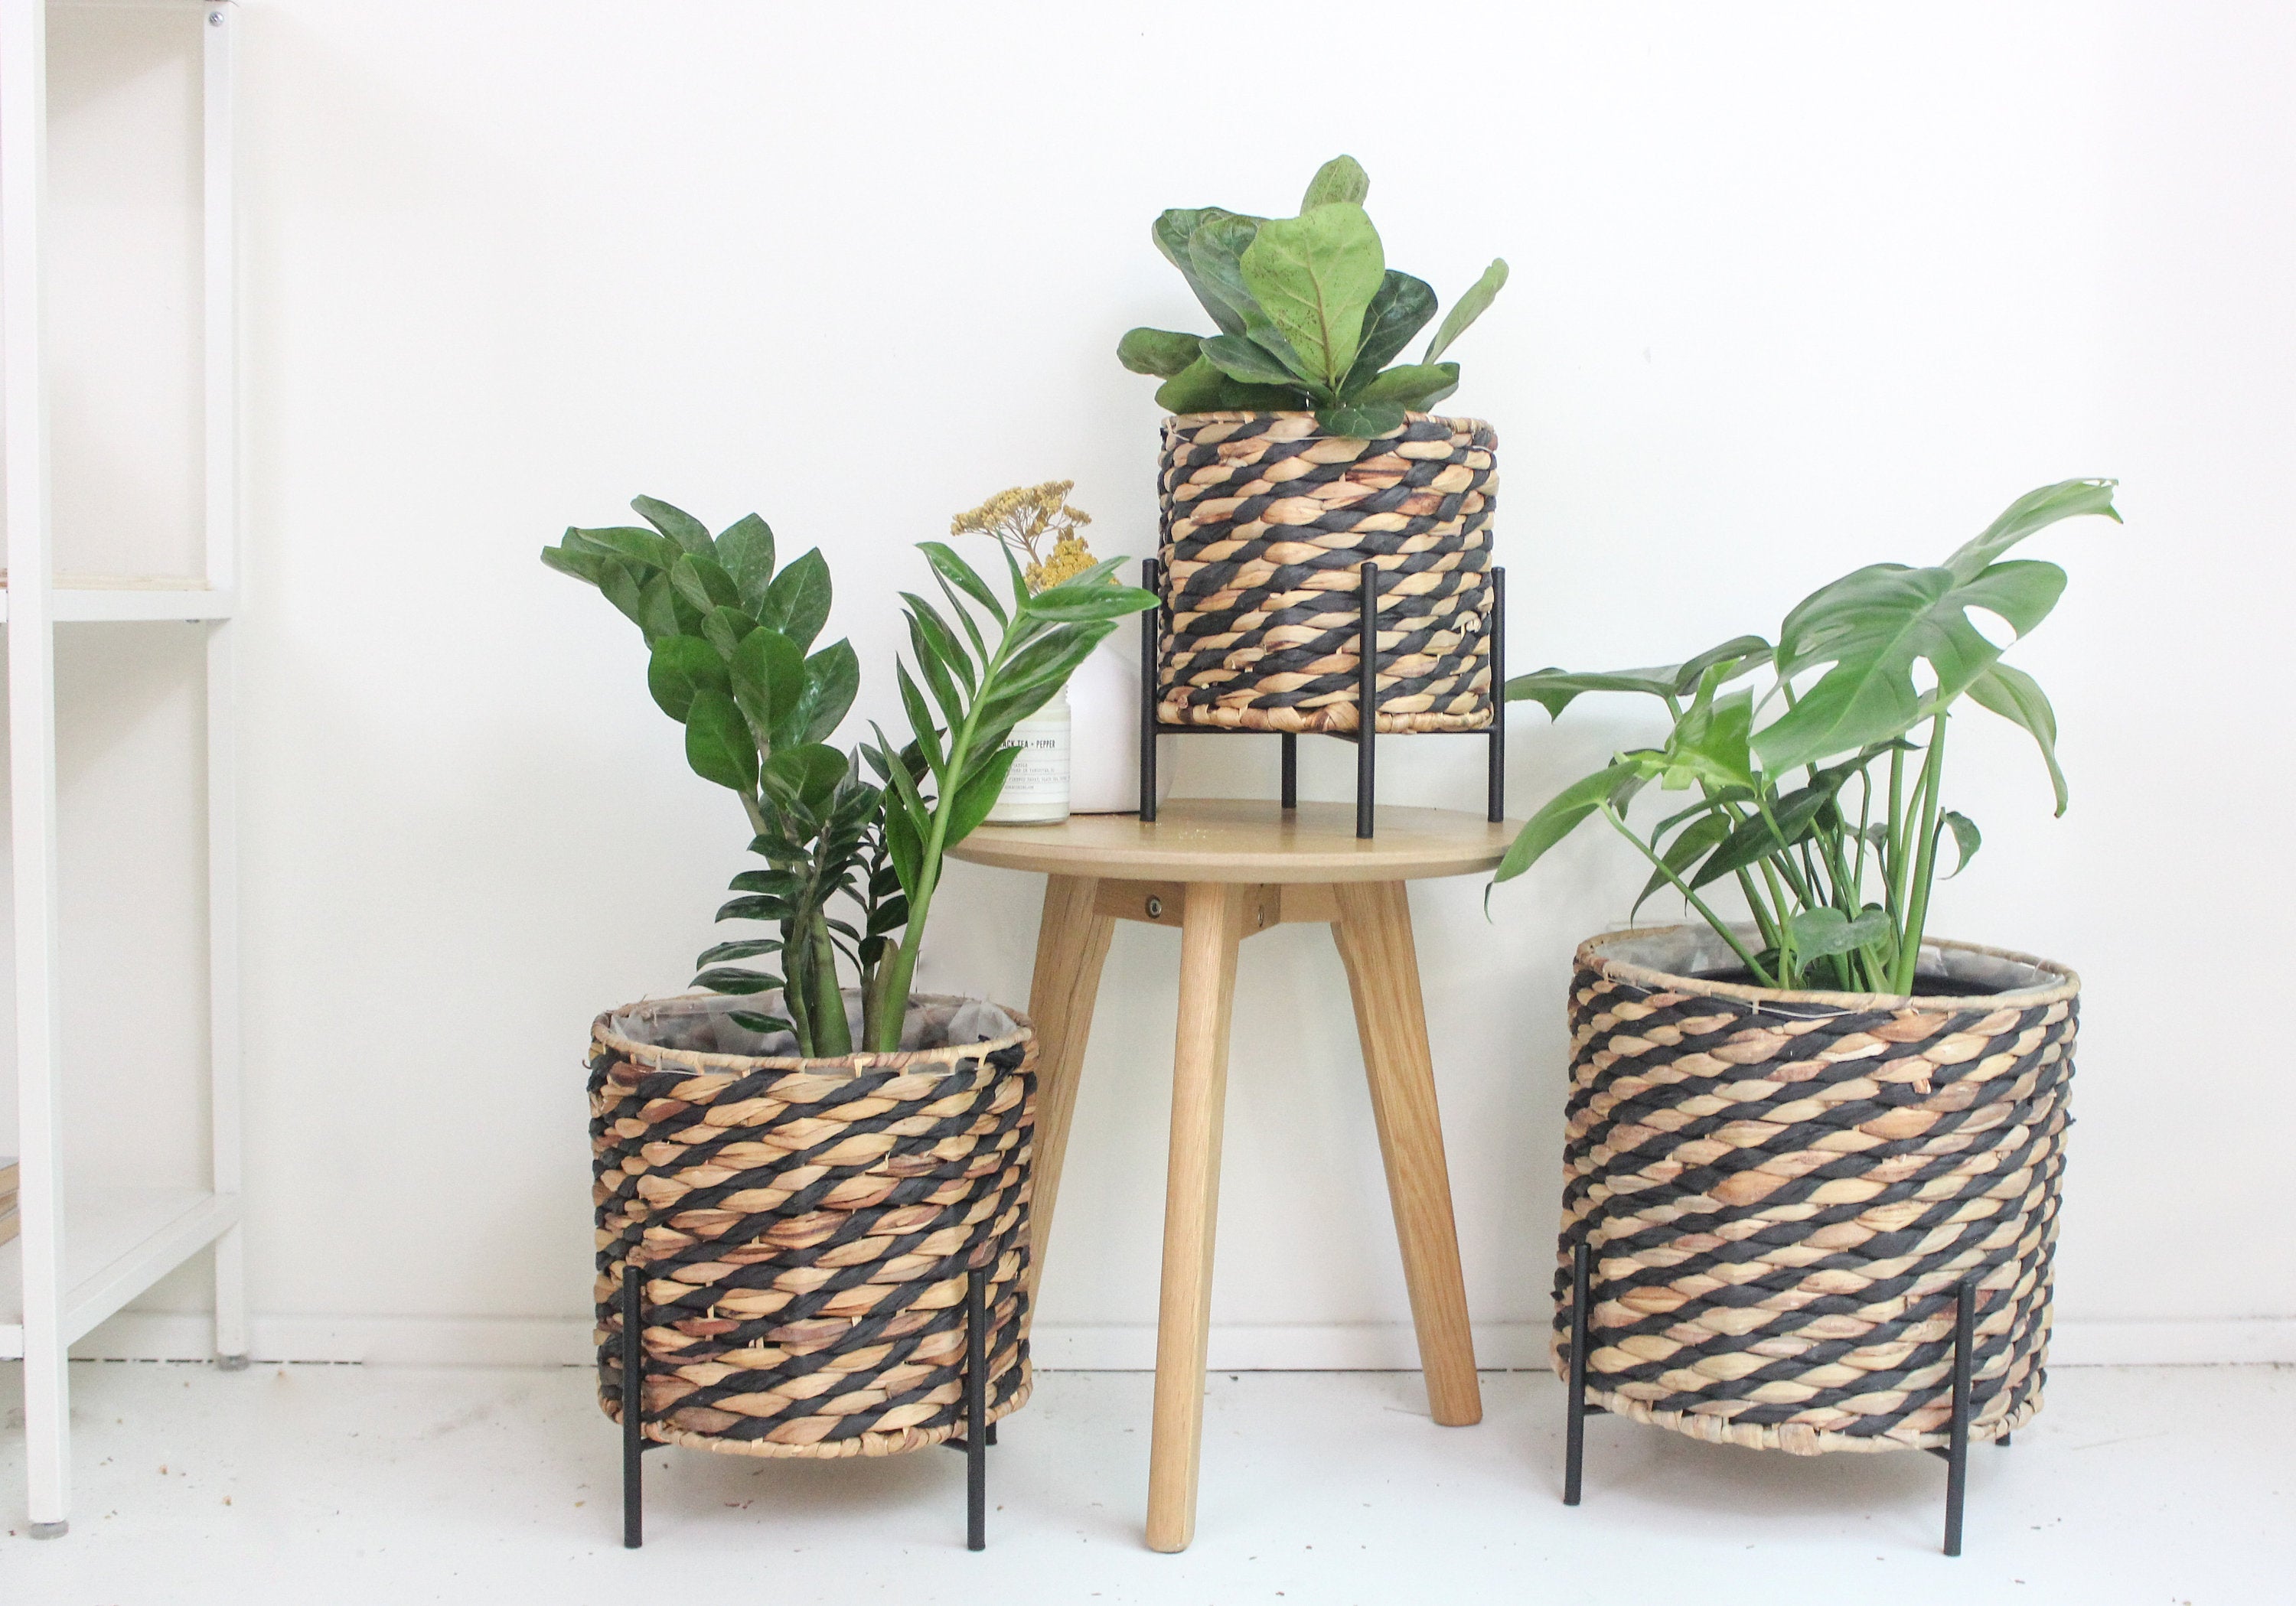 Standing Floor Planter with Contrast Woven Seagrass